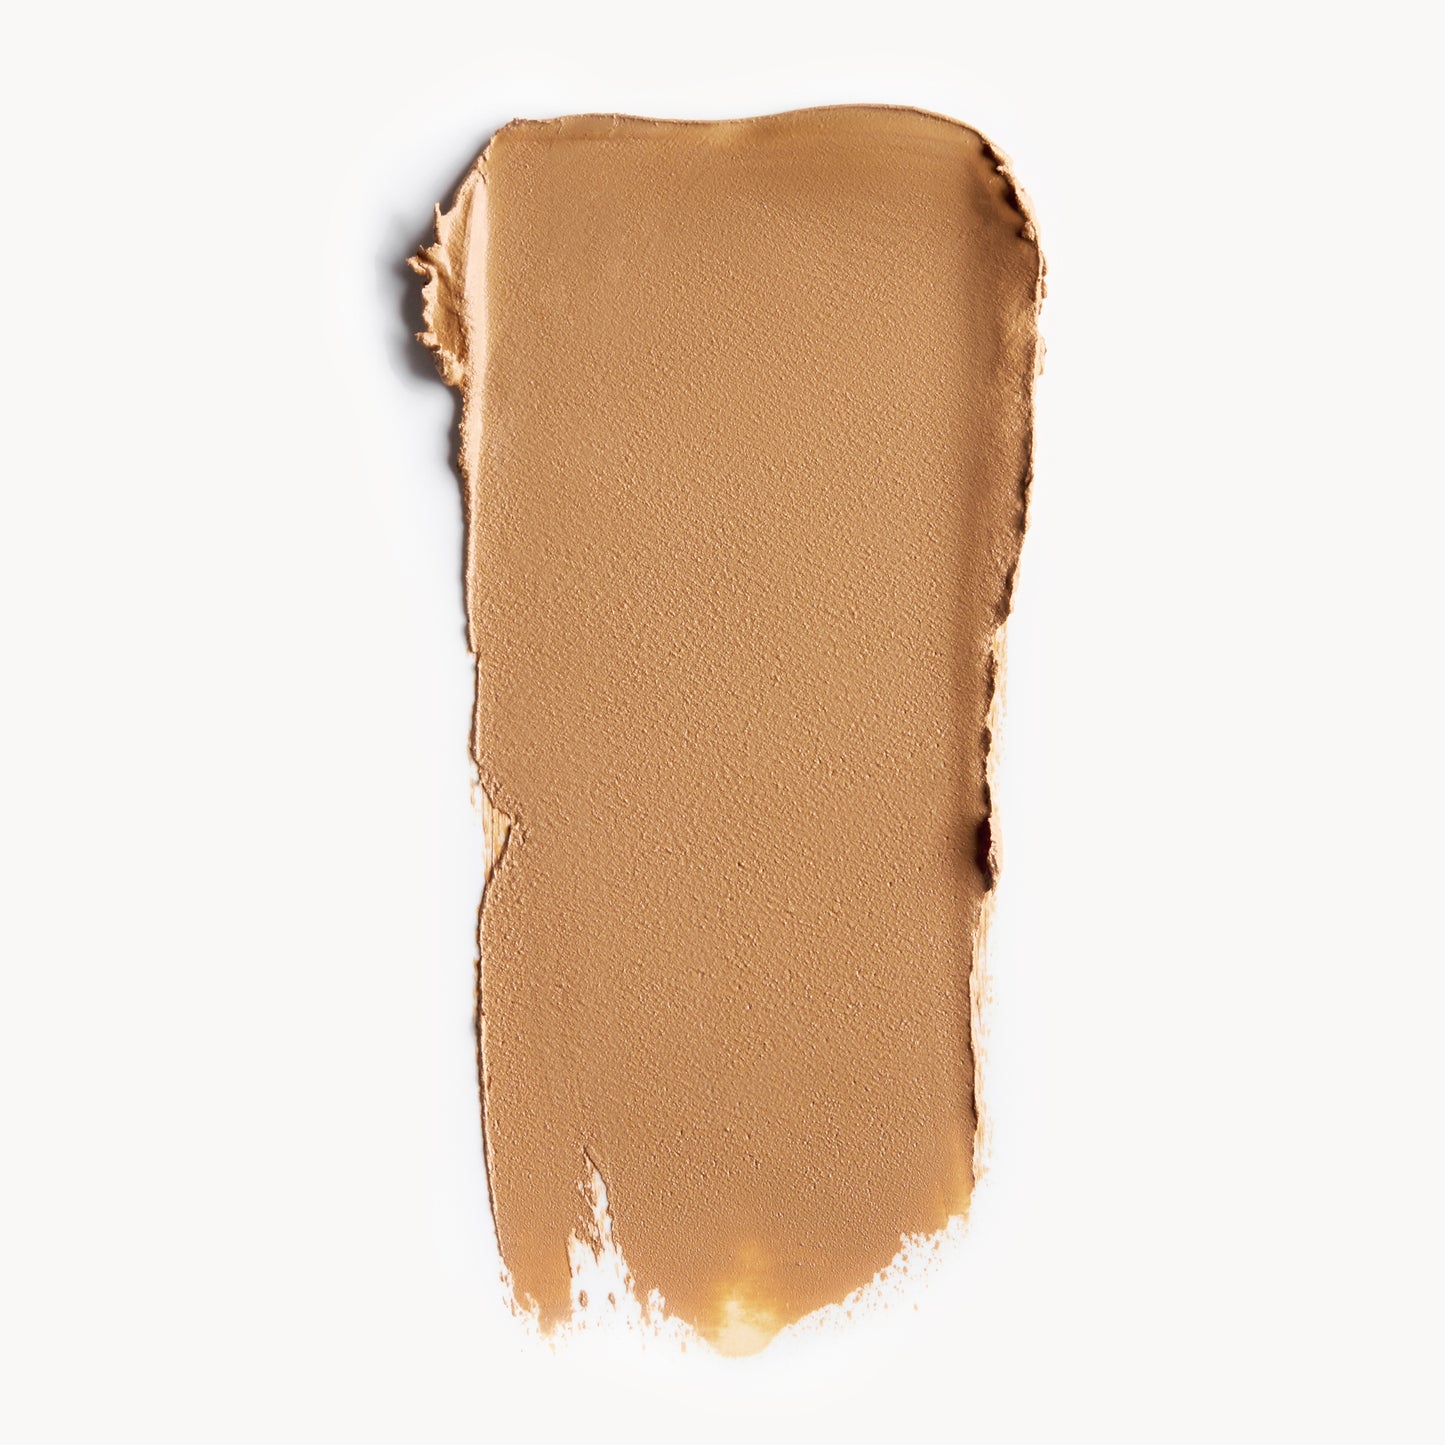 A wipe of medium, cool-toned cream foundation on a white background